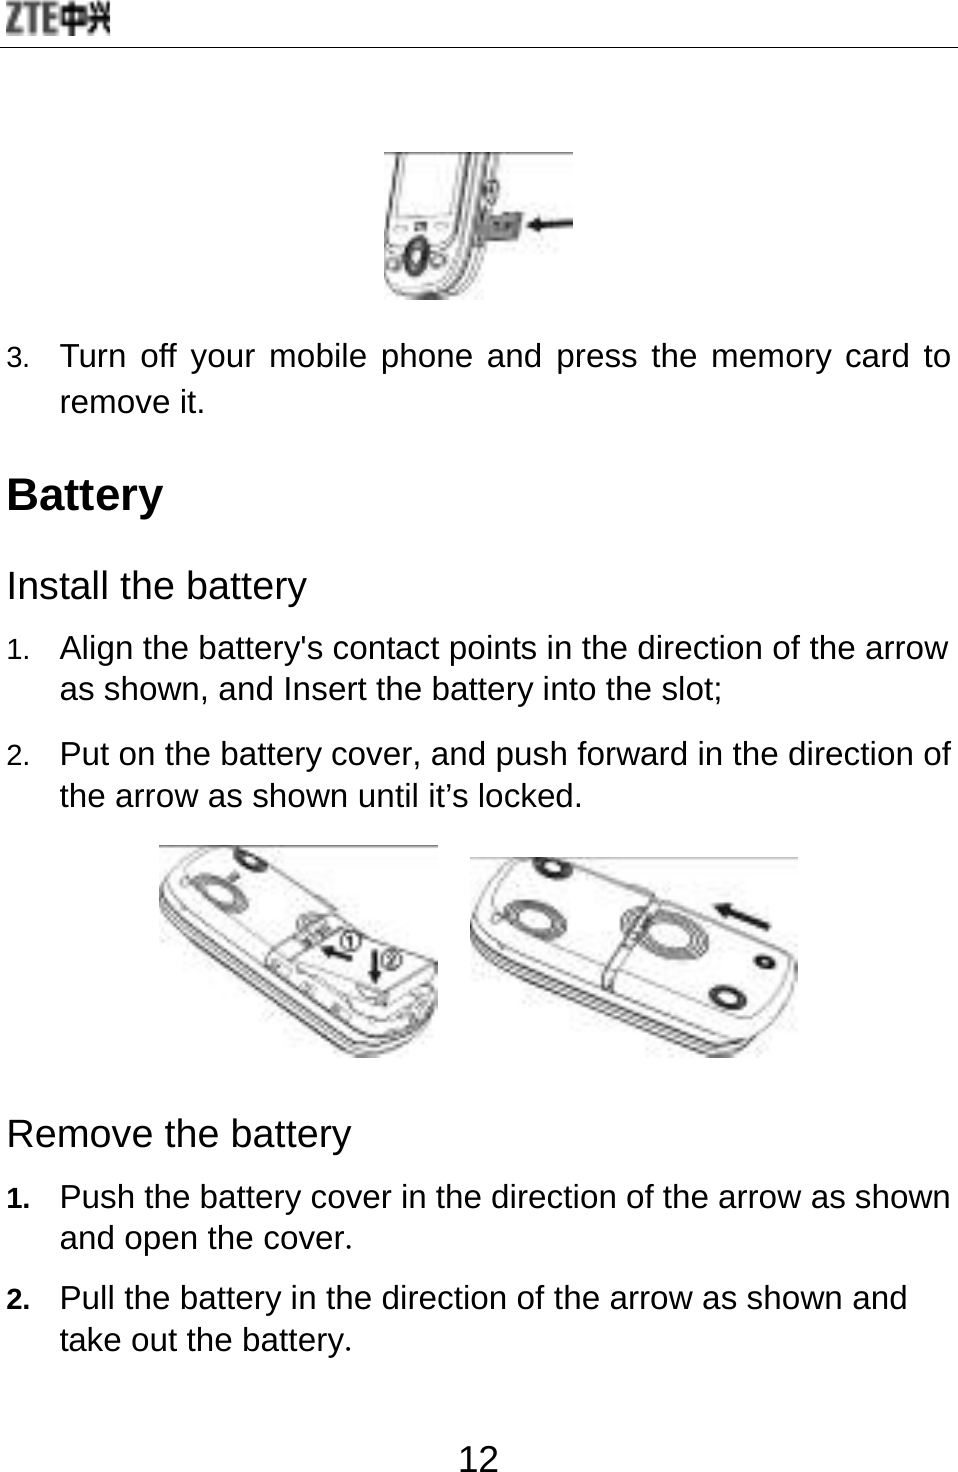  12  3.  Turn off your mobile phone and press the memory card to remove it.   Battery Install the battery 1.  Align the battery&apos;s contact points in the direction of the arrow as shown, and Insert the battery into the slot; 2.  Put on the battery cover, and push forward in the direction of the arrow as shown until it’s locked.      Remove the battery 1.  Push the battery cover in the direction of the arrow as shown and open the cover. 2.  Pull the battery in the direction of the arrow as shown and take out the battery. 